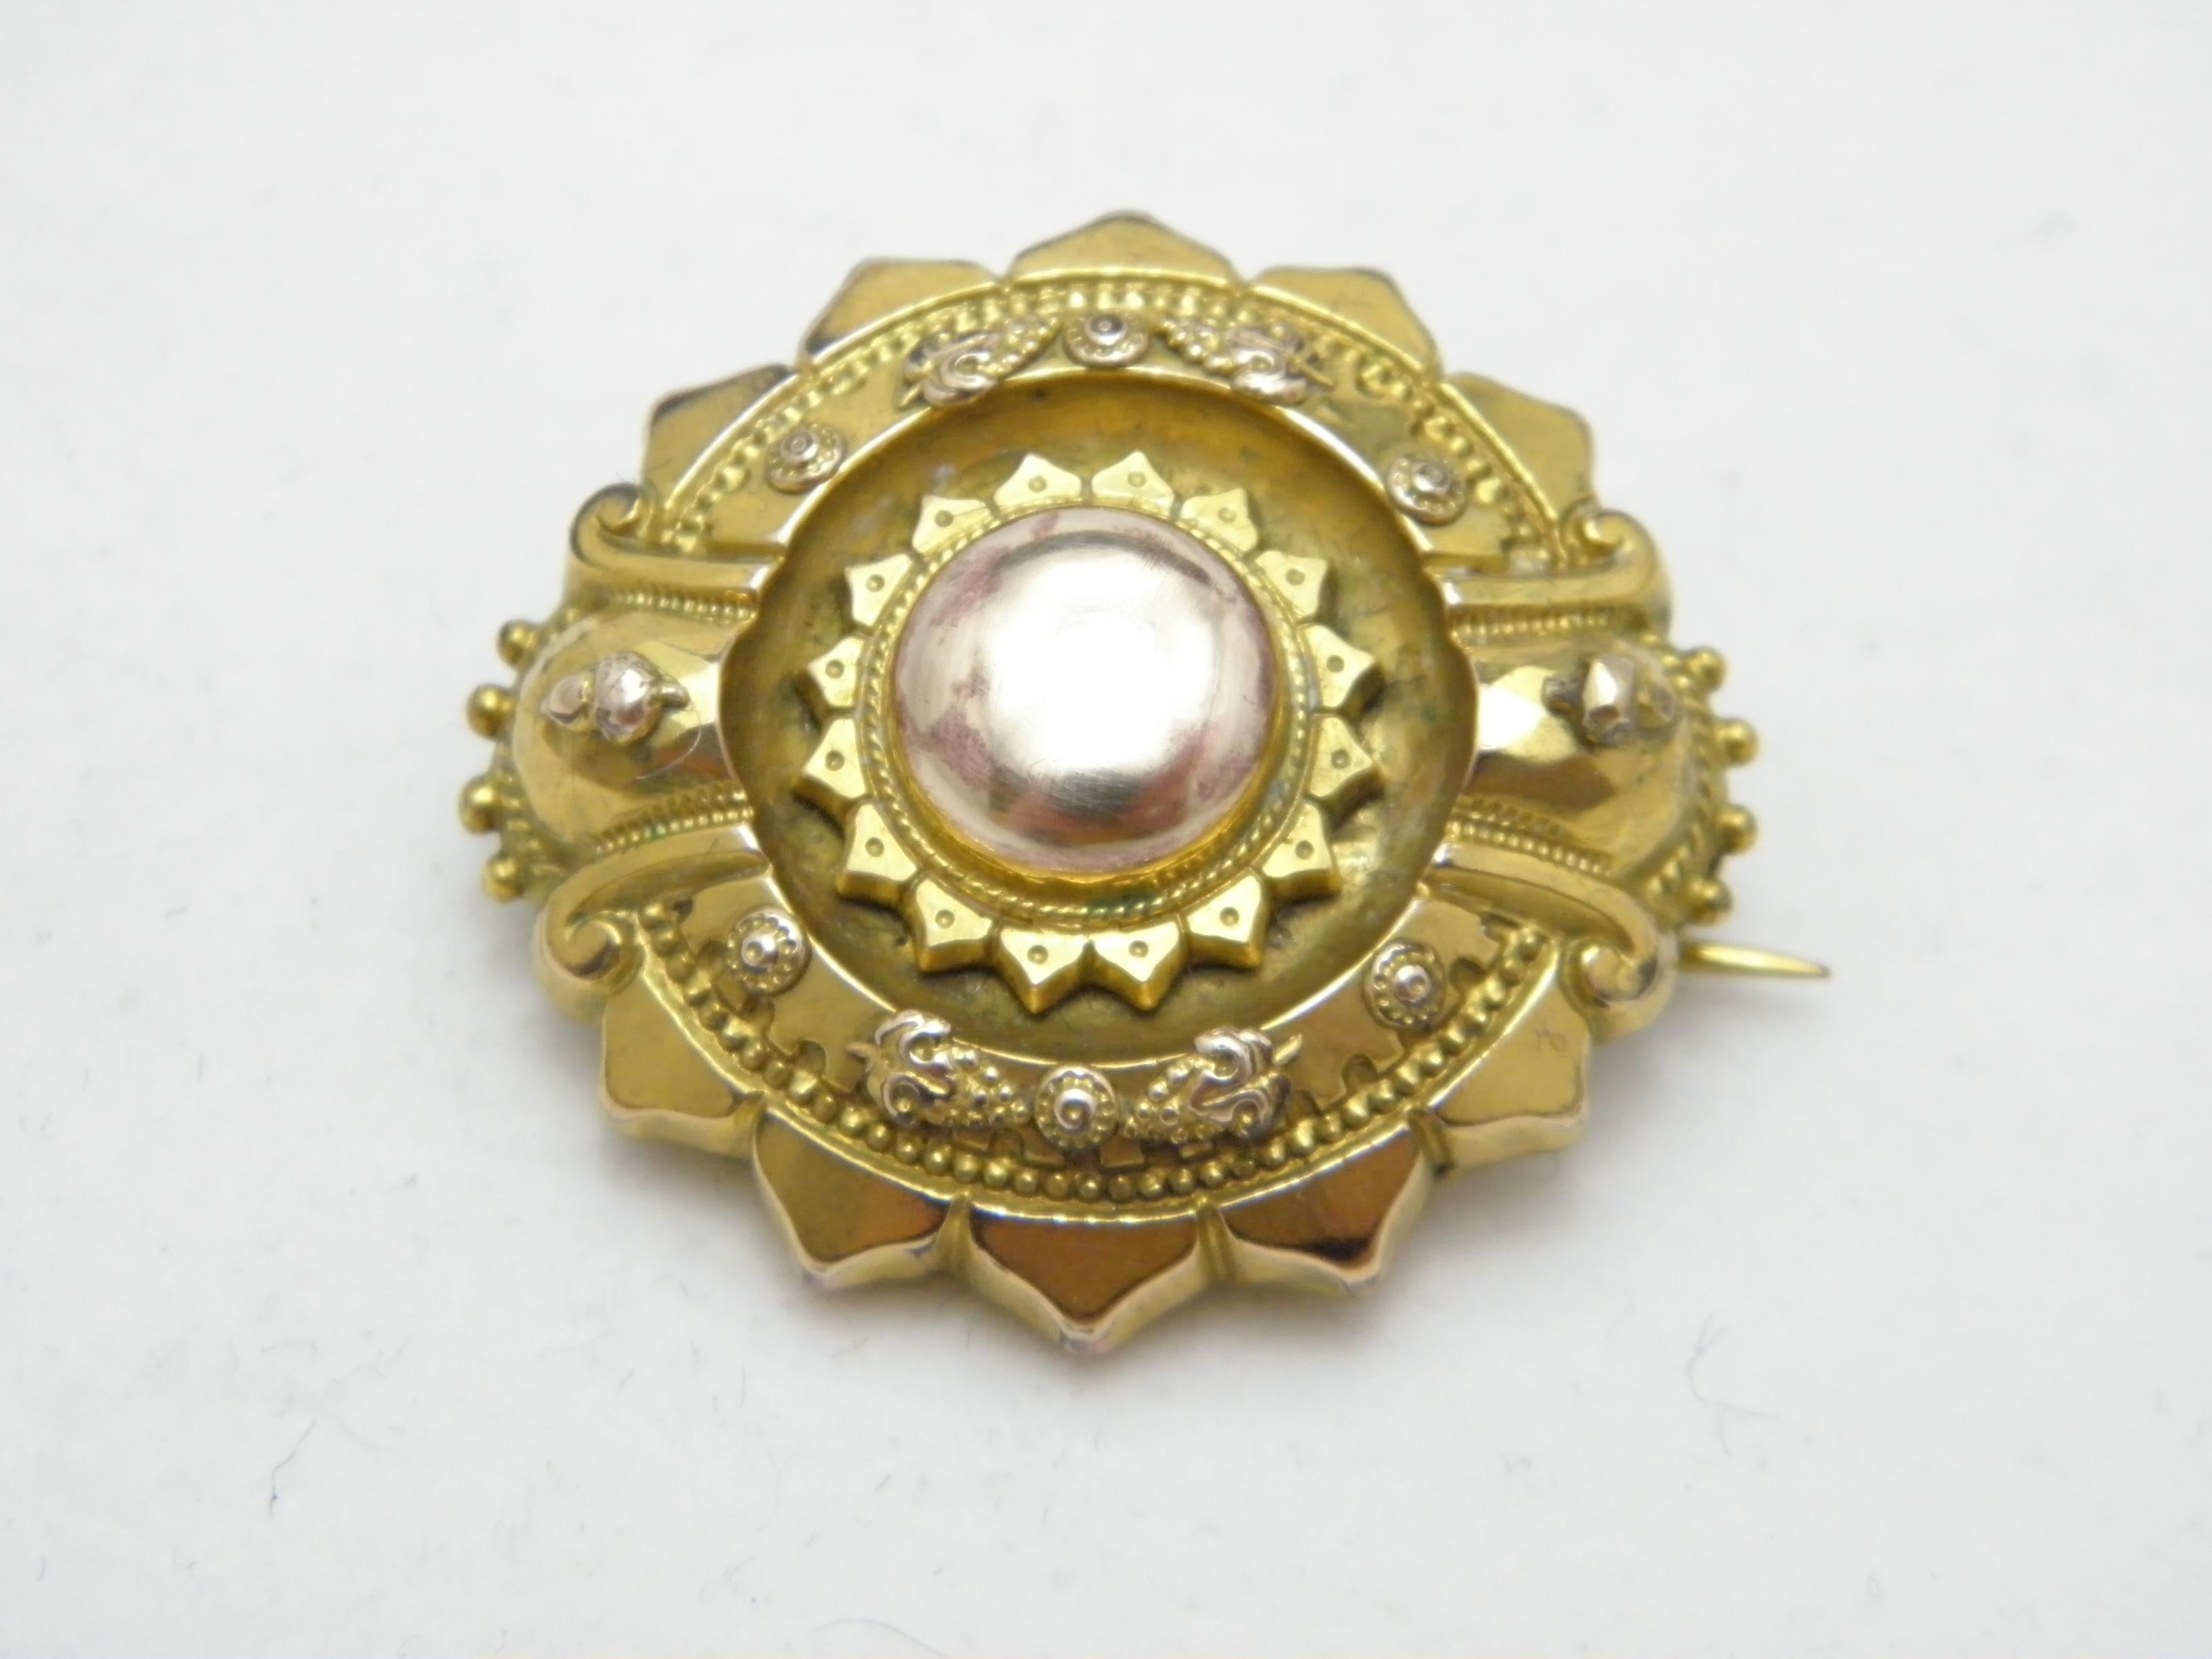 If you have landed on this page then you have an eye for beauty.

On offer is this gorgeous


15CT HEAVY GOLD HIGHLY DETAILED PHOTO LOCKET BROOCH

DETAILS
Material: 15ct (625/000) Solid Heavy Rose and Yellow Gold
Style: Georgian classic brooch / pin